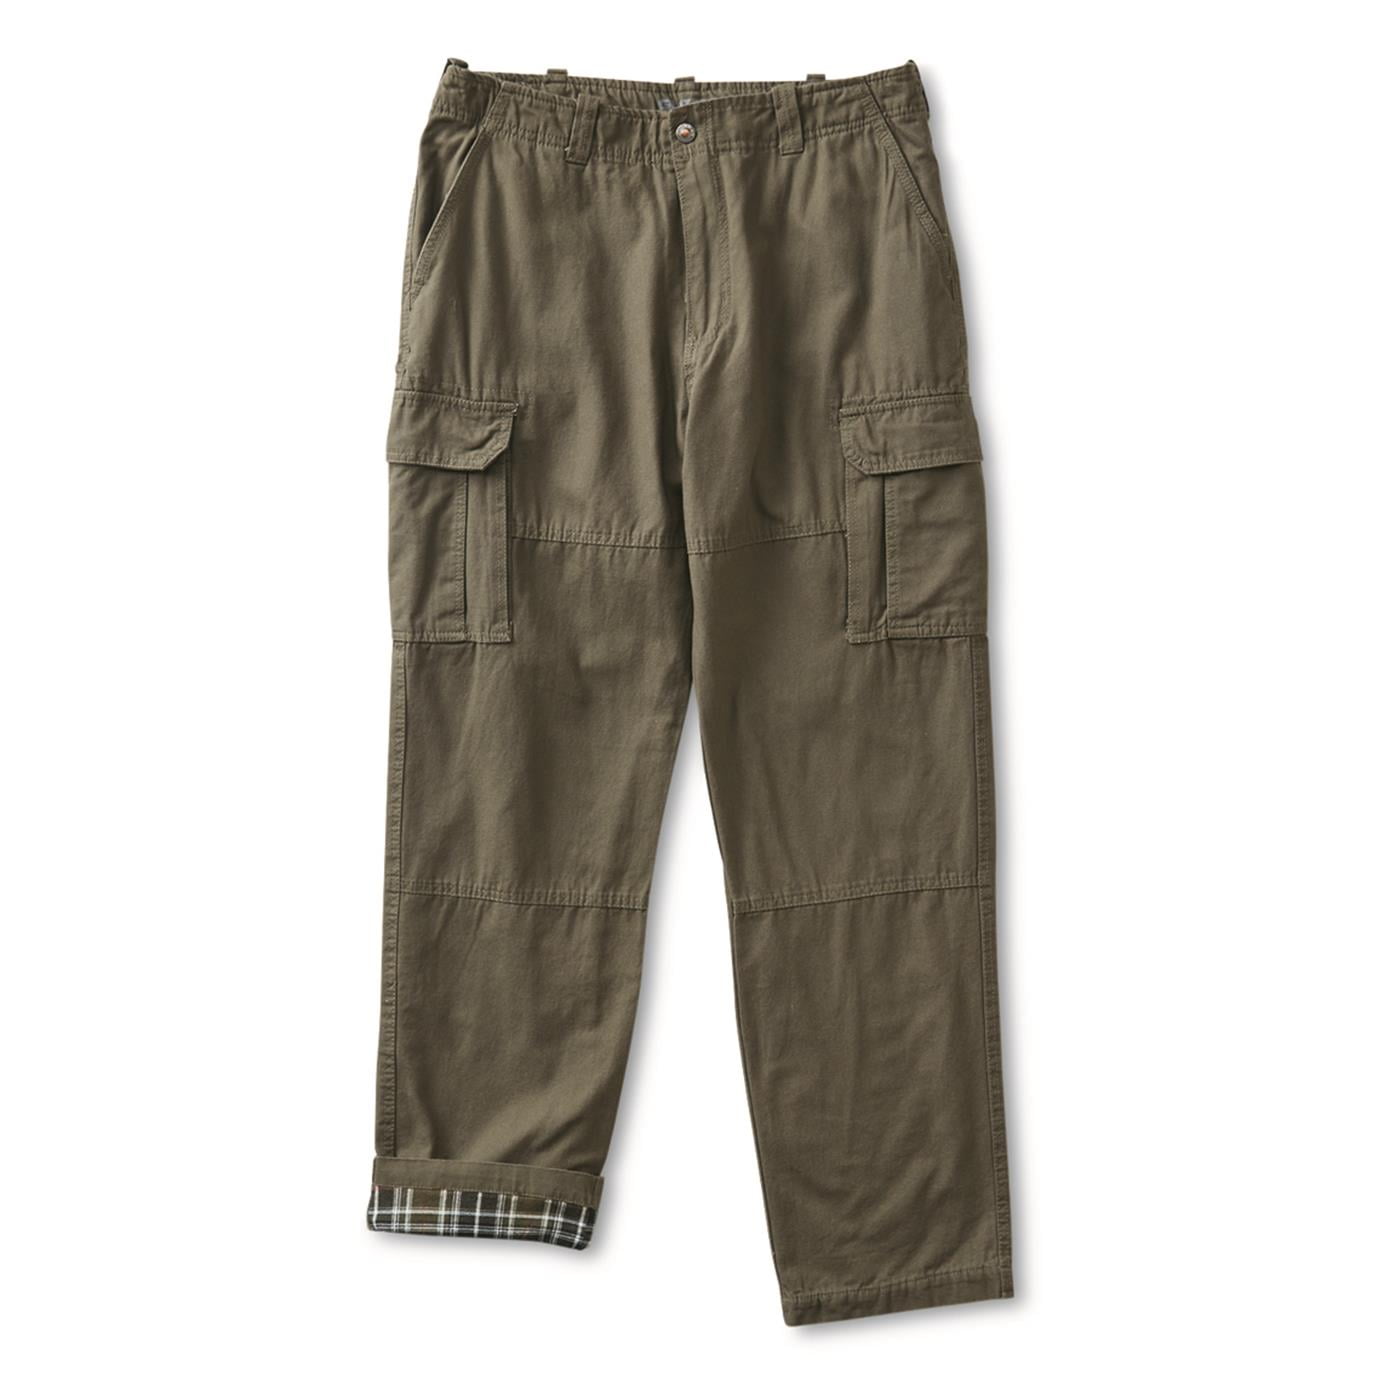 Guide Gear Outdoor 2.0 Flannel-Lined Cotton Cargo Pants, Khaki, W32 L30 at   Men's Clothing store